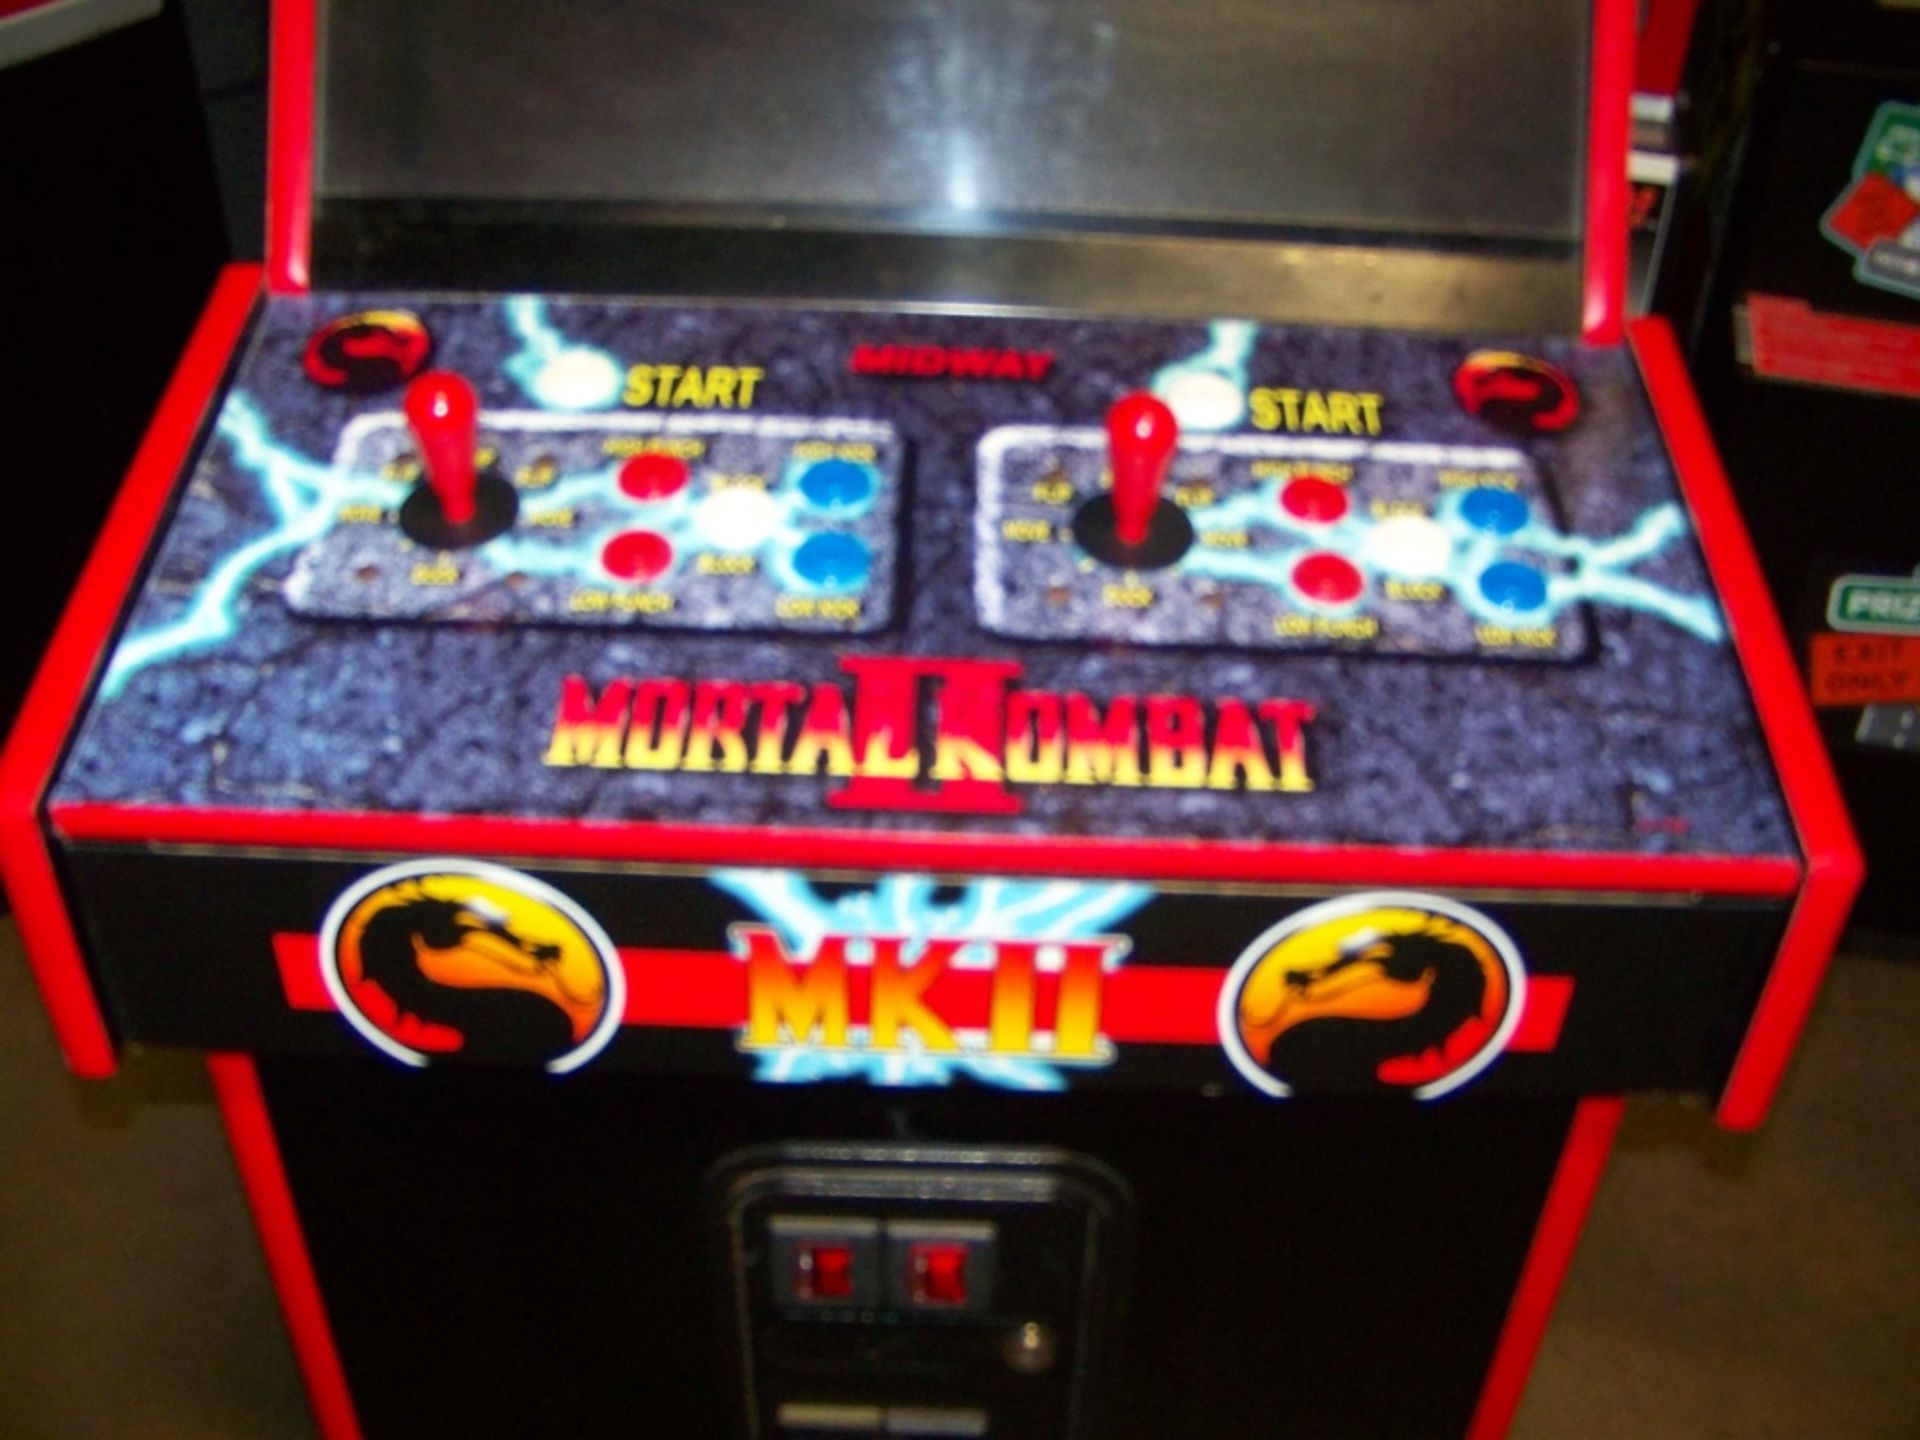 MORTAL KOMBAT II ARCADE GAME MIDWAY Item is in used condition. Evidence of wear and commercial - Image 7 of 8